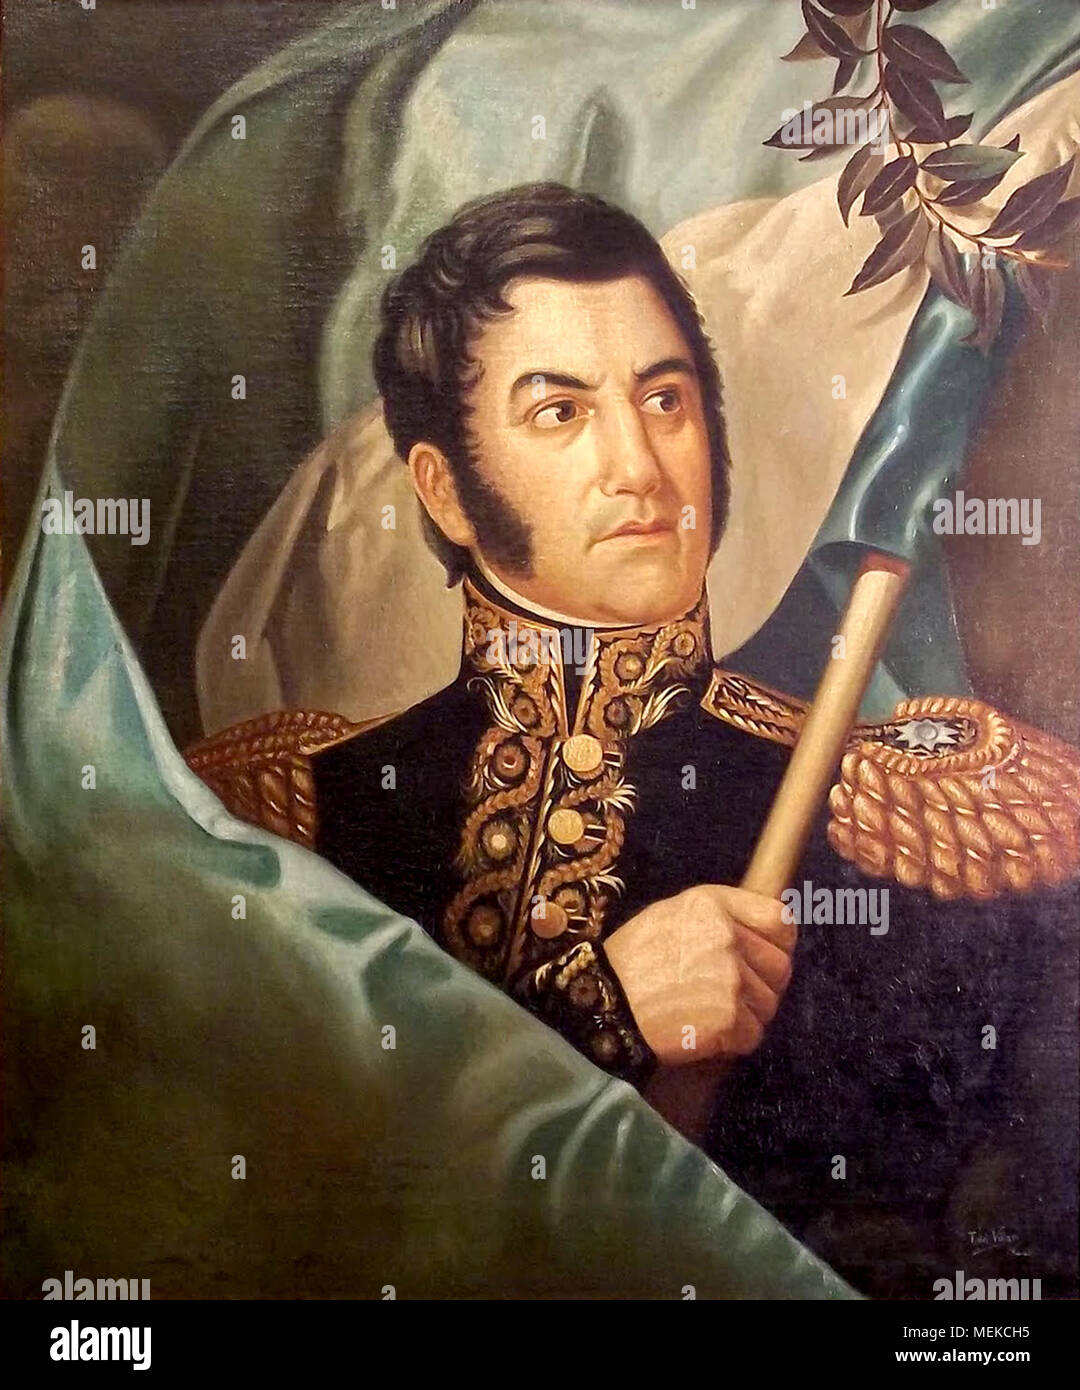 José Francisco de San Martín y Matorras (1778 – 1850), José de San Martín, Argentine general and the prime leader of the southern part of South America's successful struggle for independence from the Spanish Empire who served as the Protector of Peru. Stock Photo